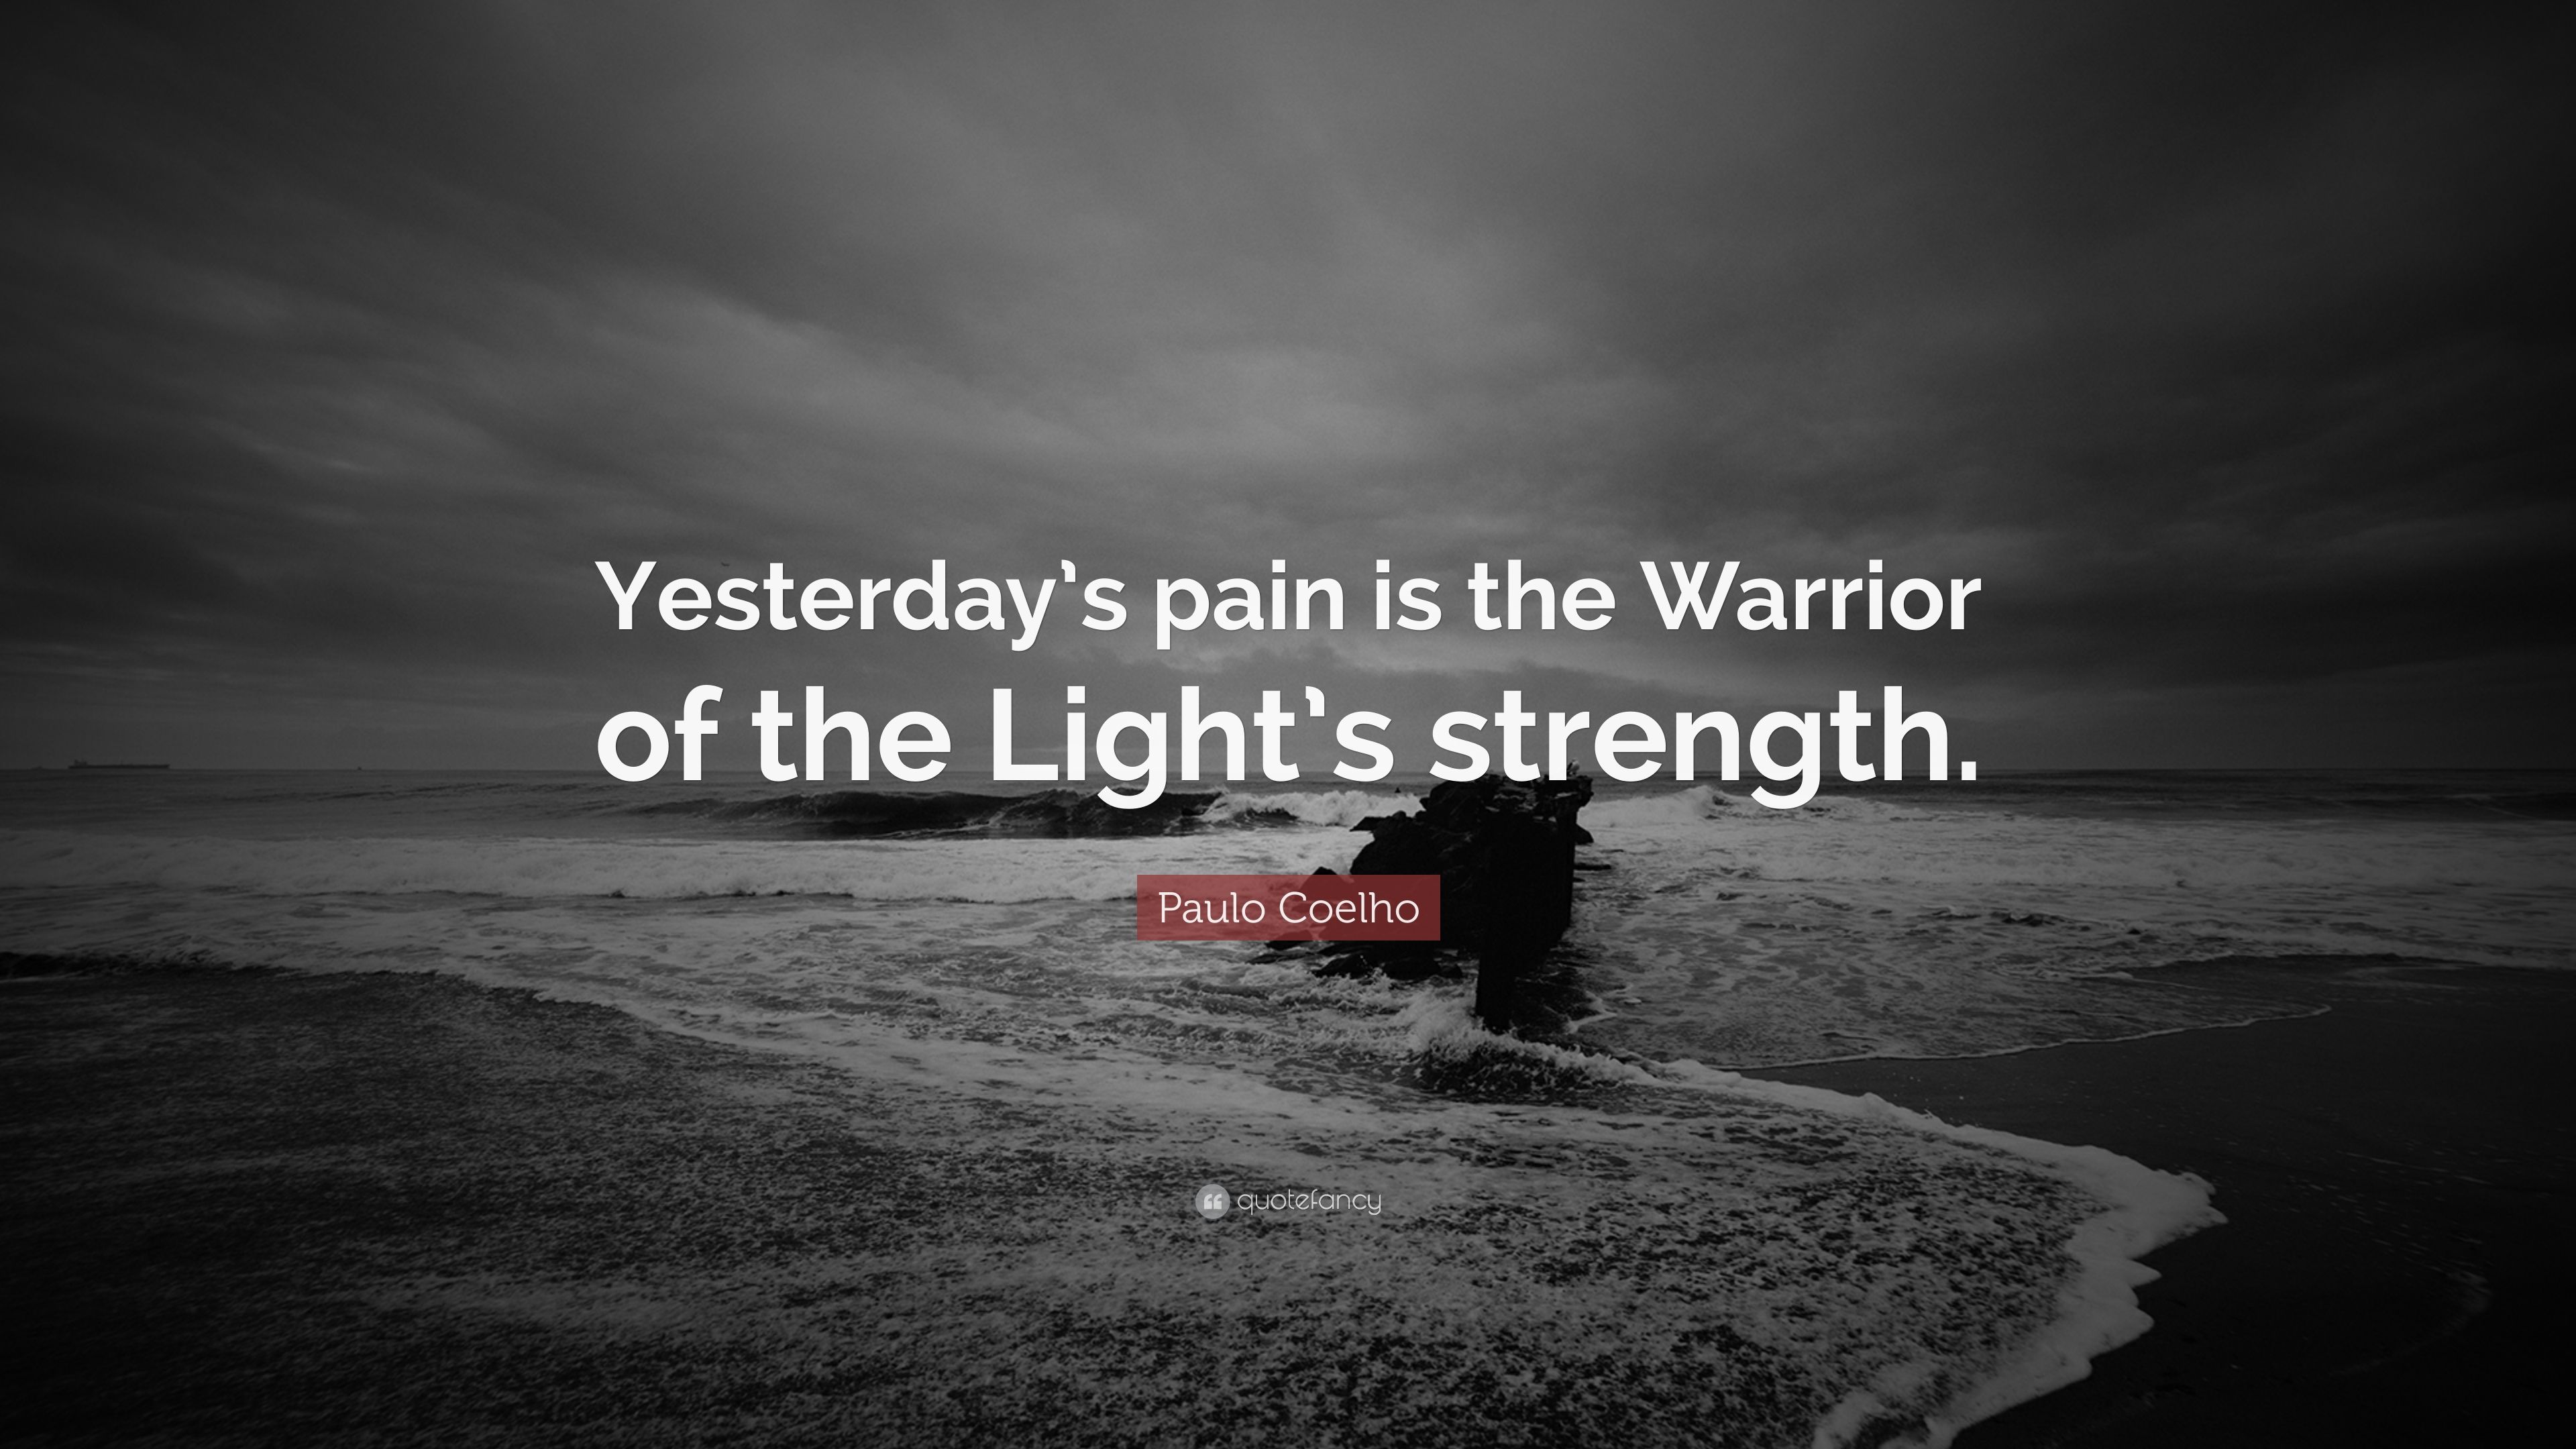 Paulo Coelho Quote: “Yesterday's pain is the Warrior of the Light's strength.” (7 wallpaper)